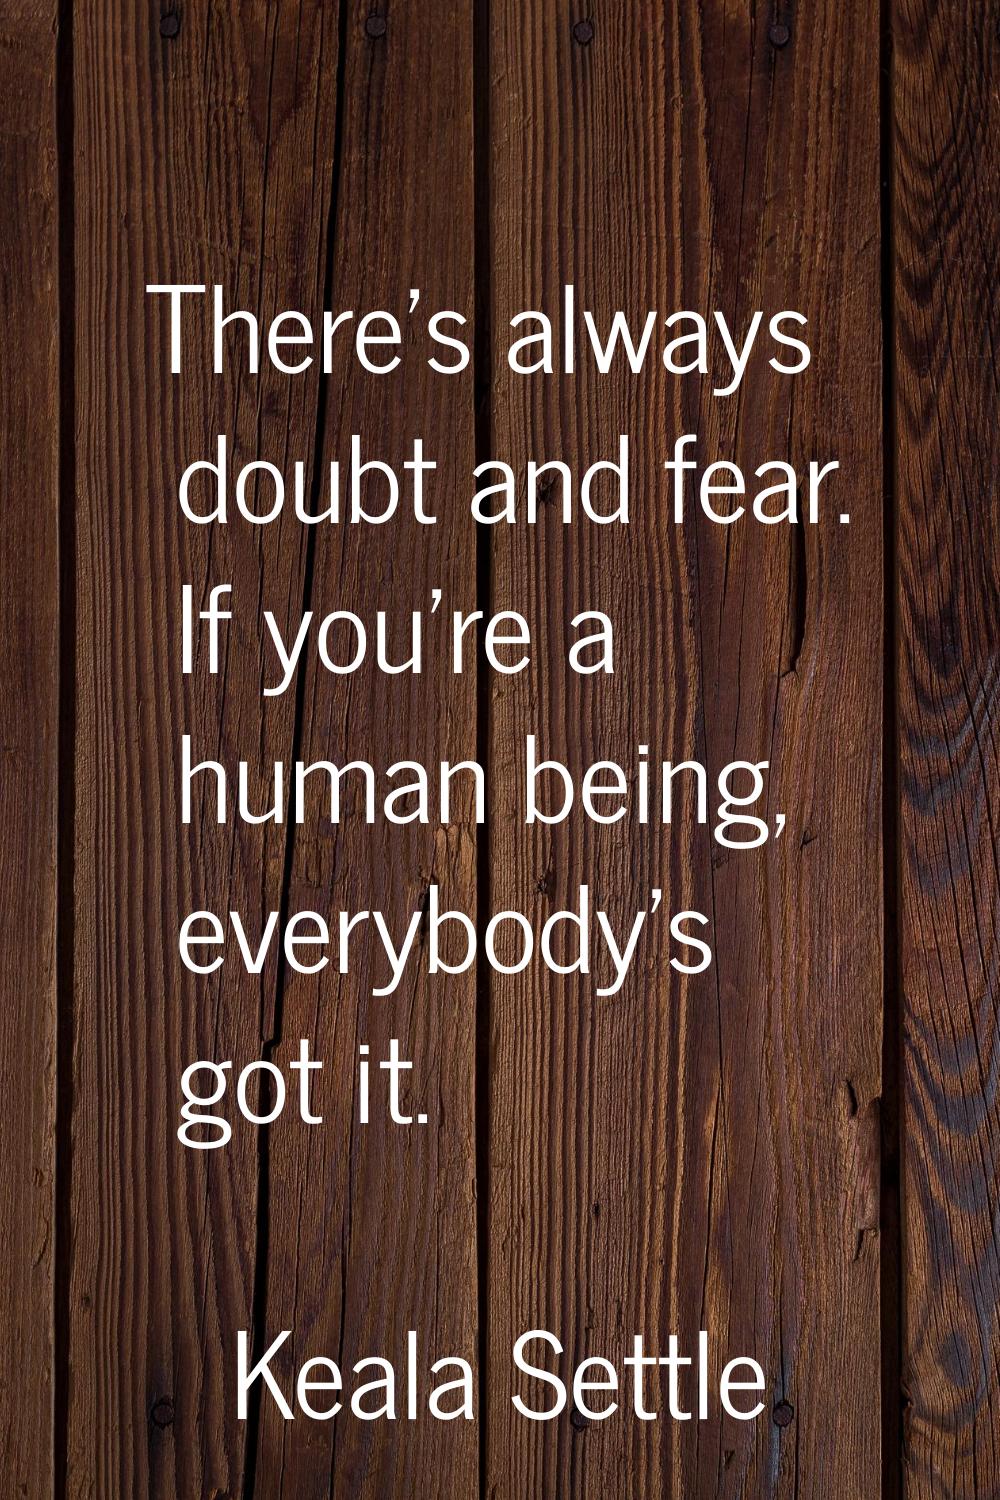 There's always doubt and fear. If you're a human being, everybody's got it.